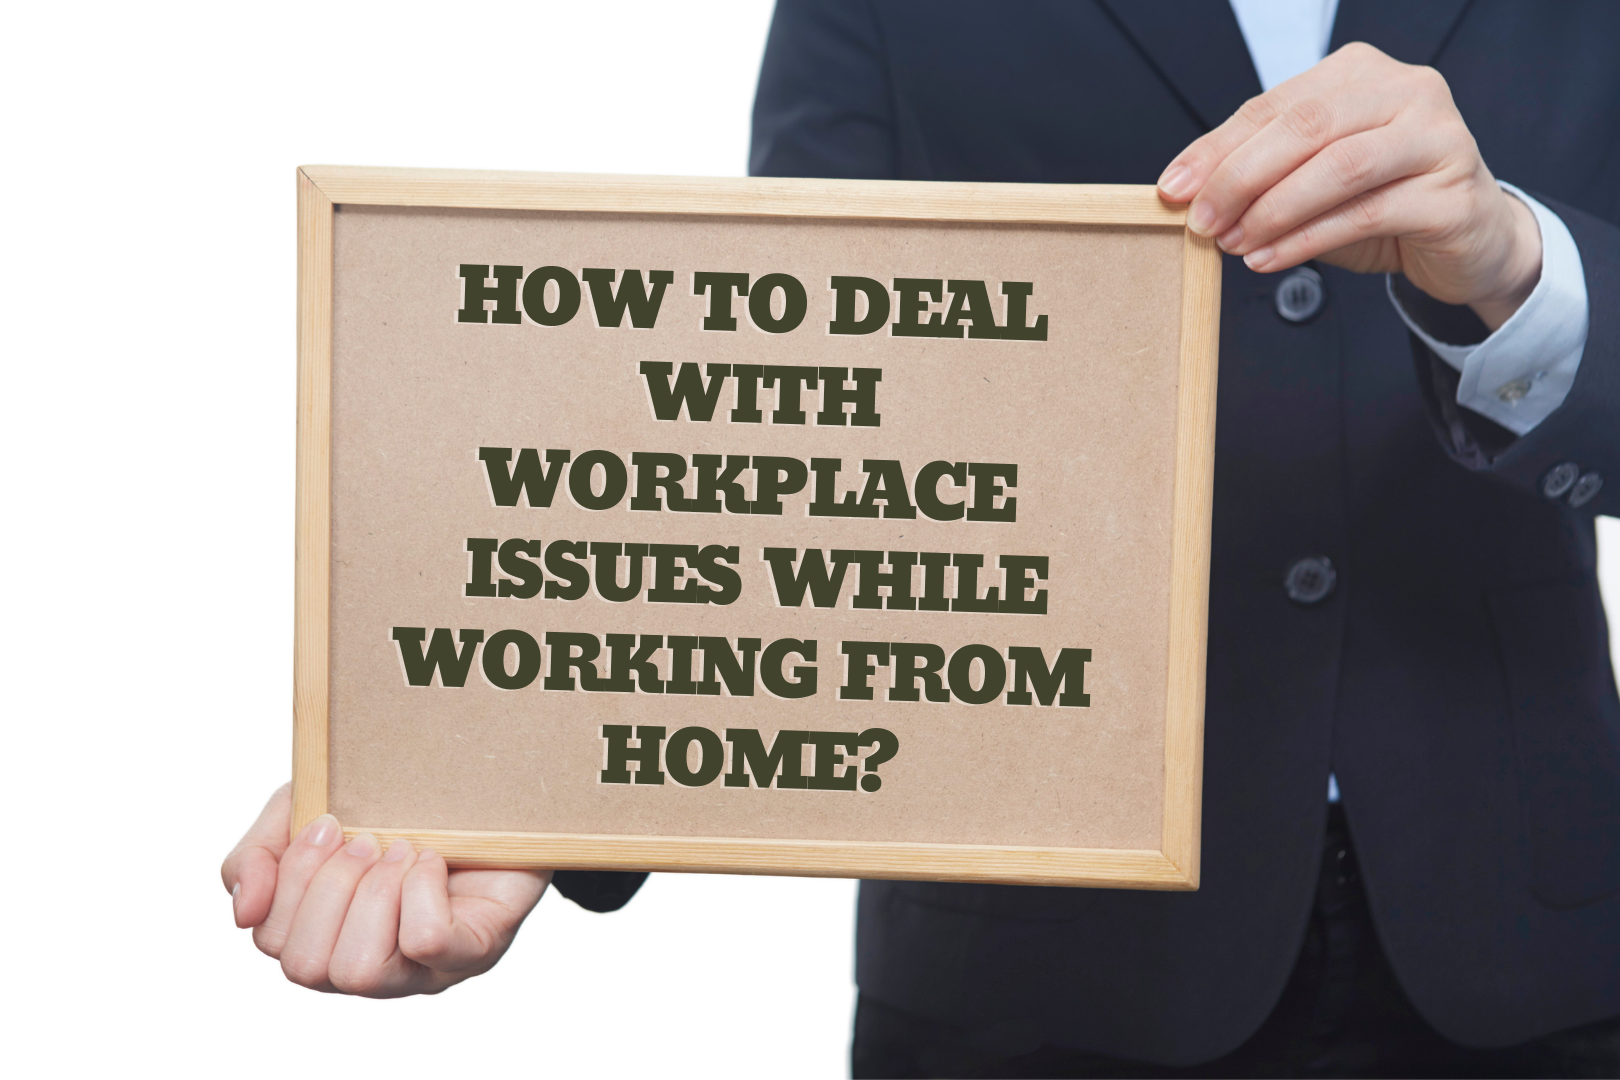 How To Deal With Workplace Issues While Working From Home